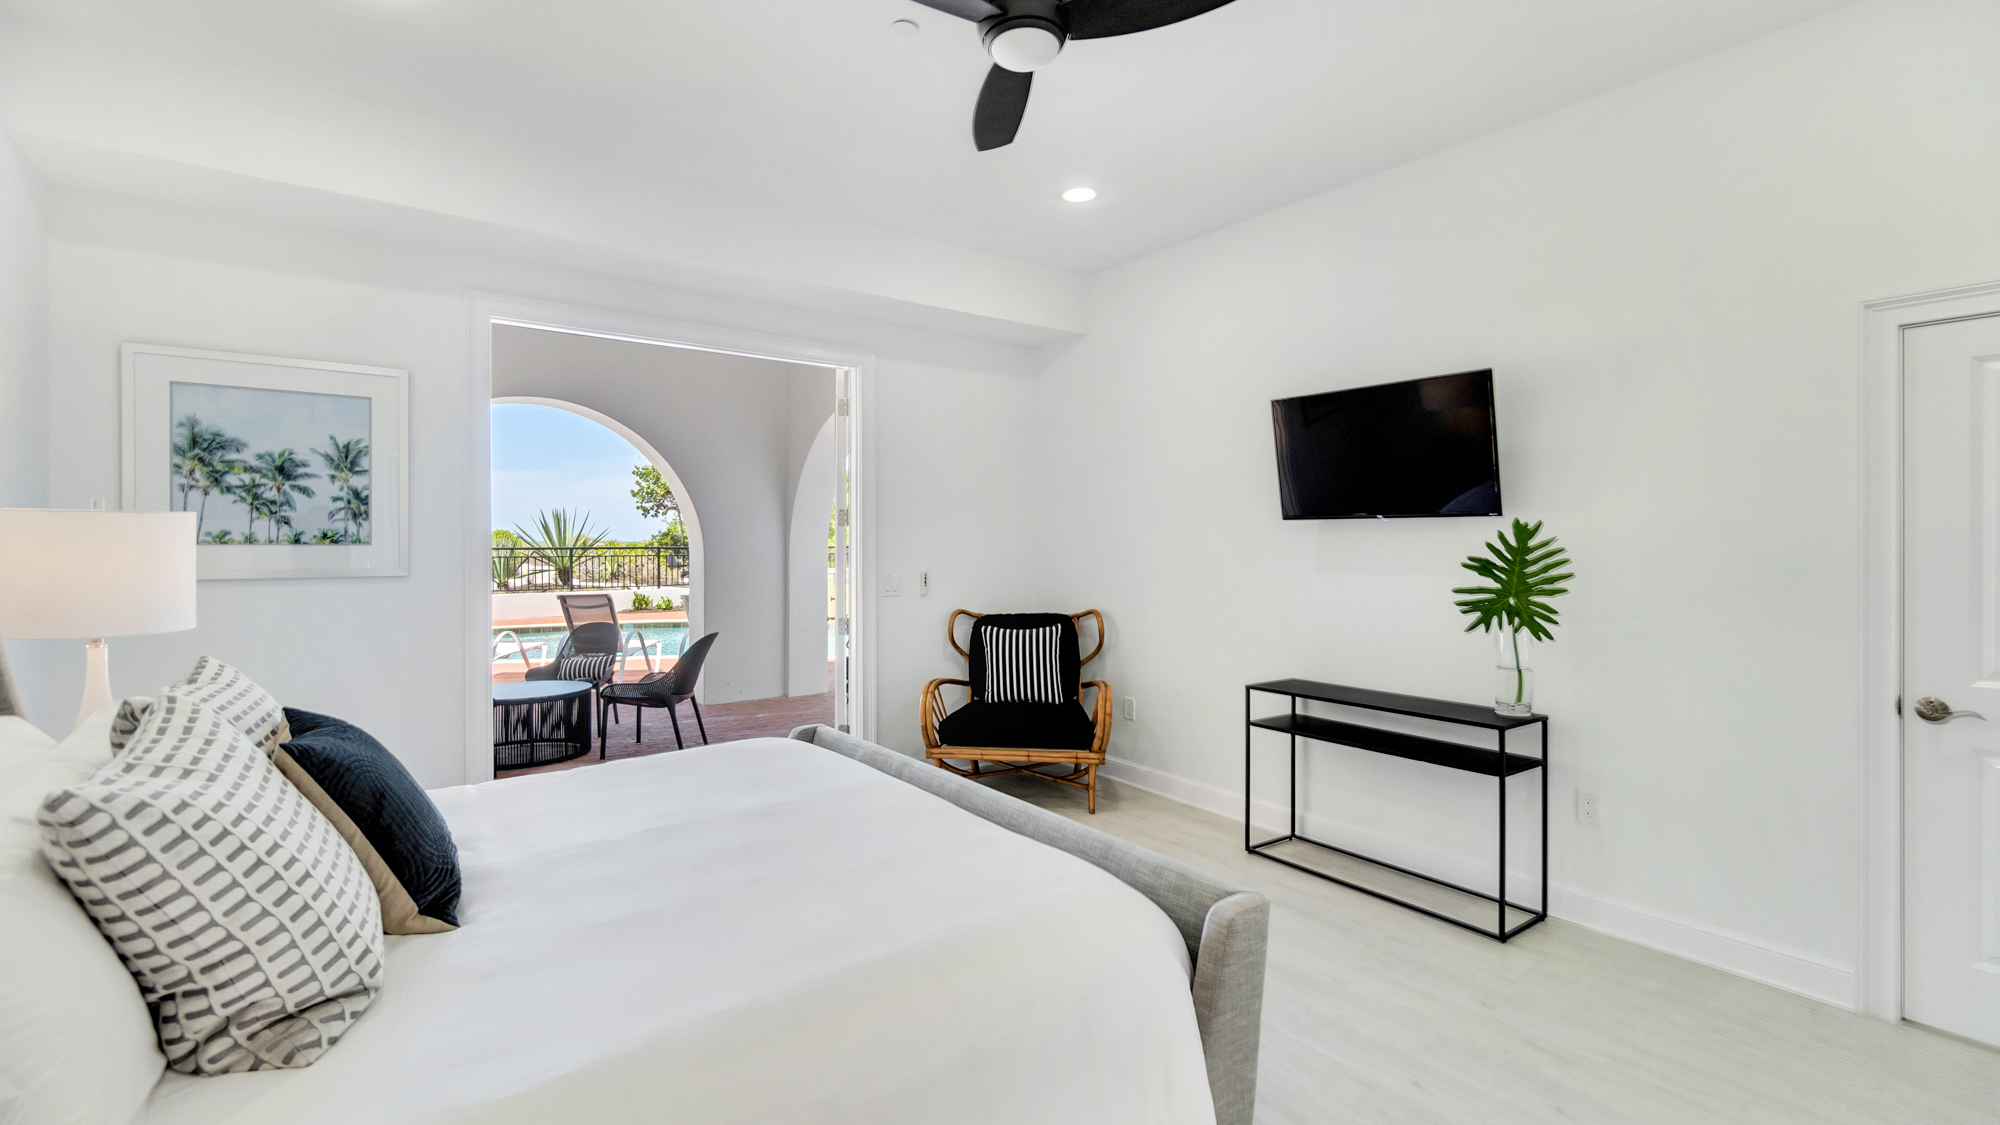 Large bed with white linens and black and white pillows in front of television hanging on the wall over looking pool at the Sea Palms Estate in Captiva Island, FL